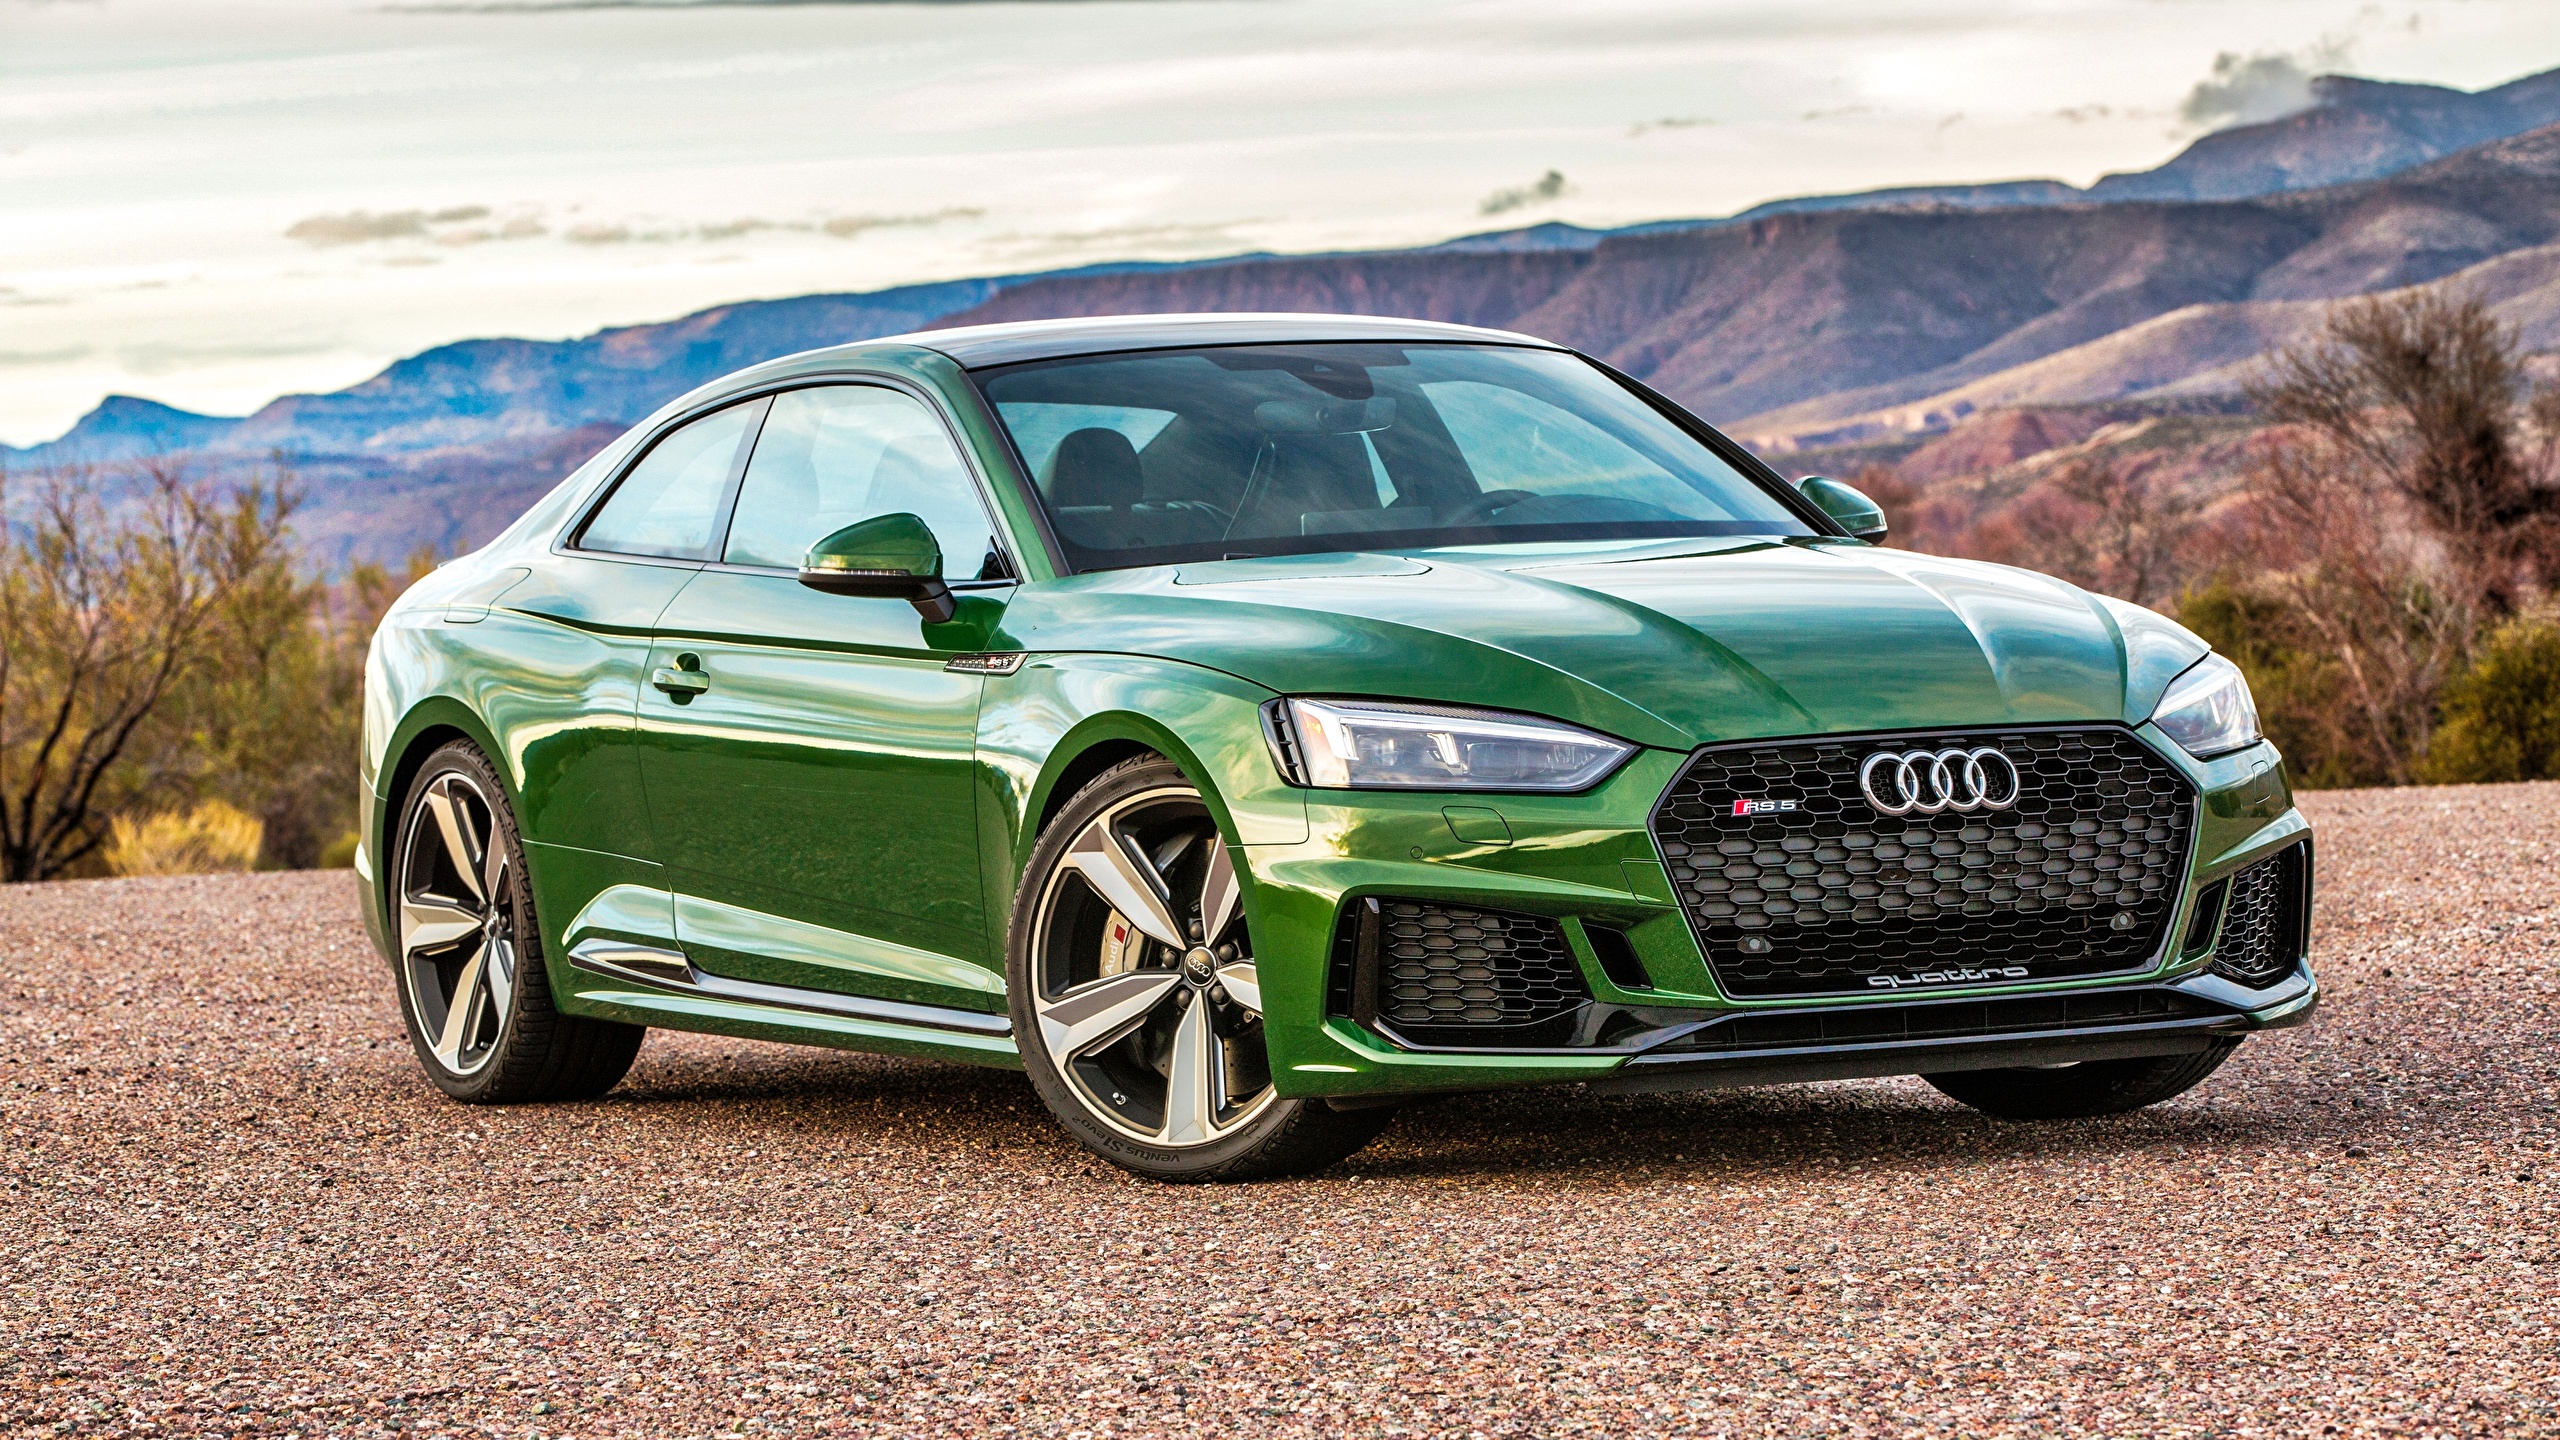 Image Audi Coupe Rs Green Auto